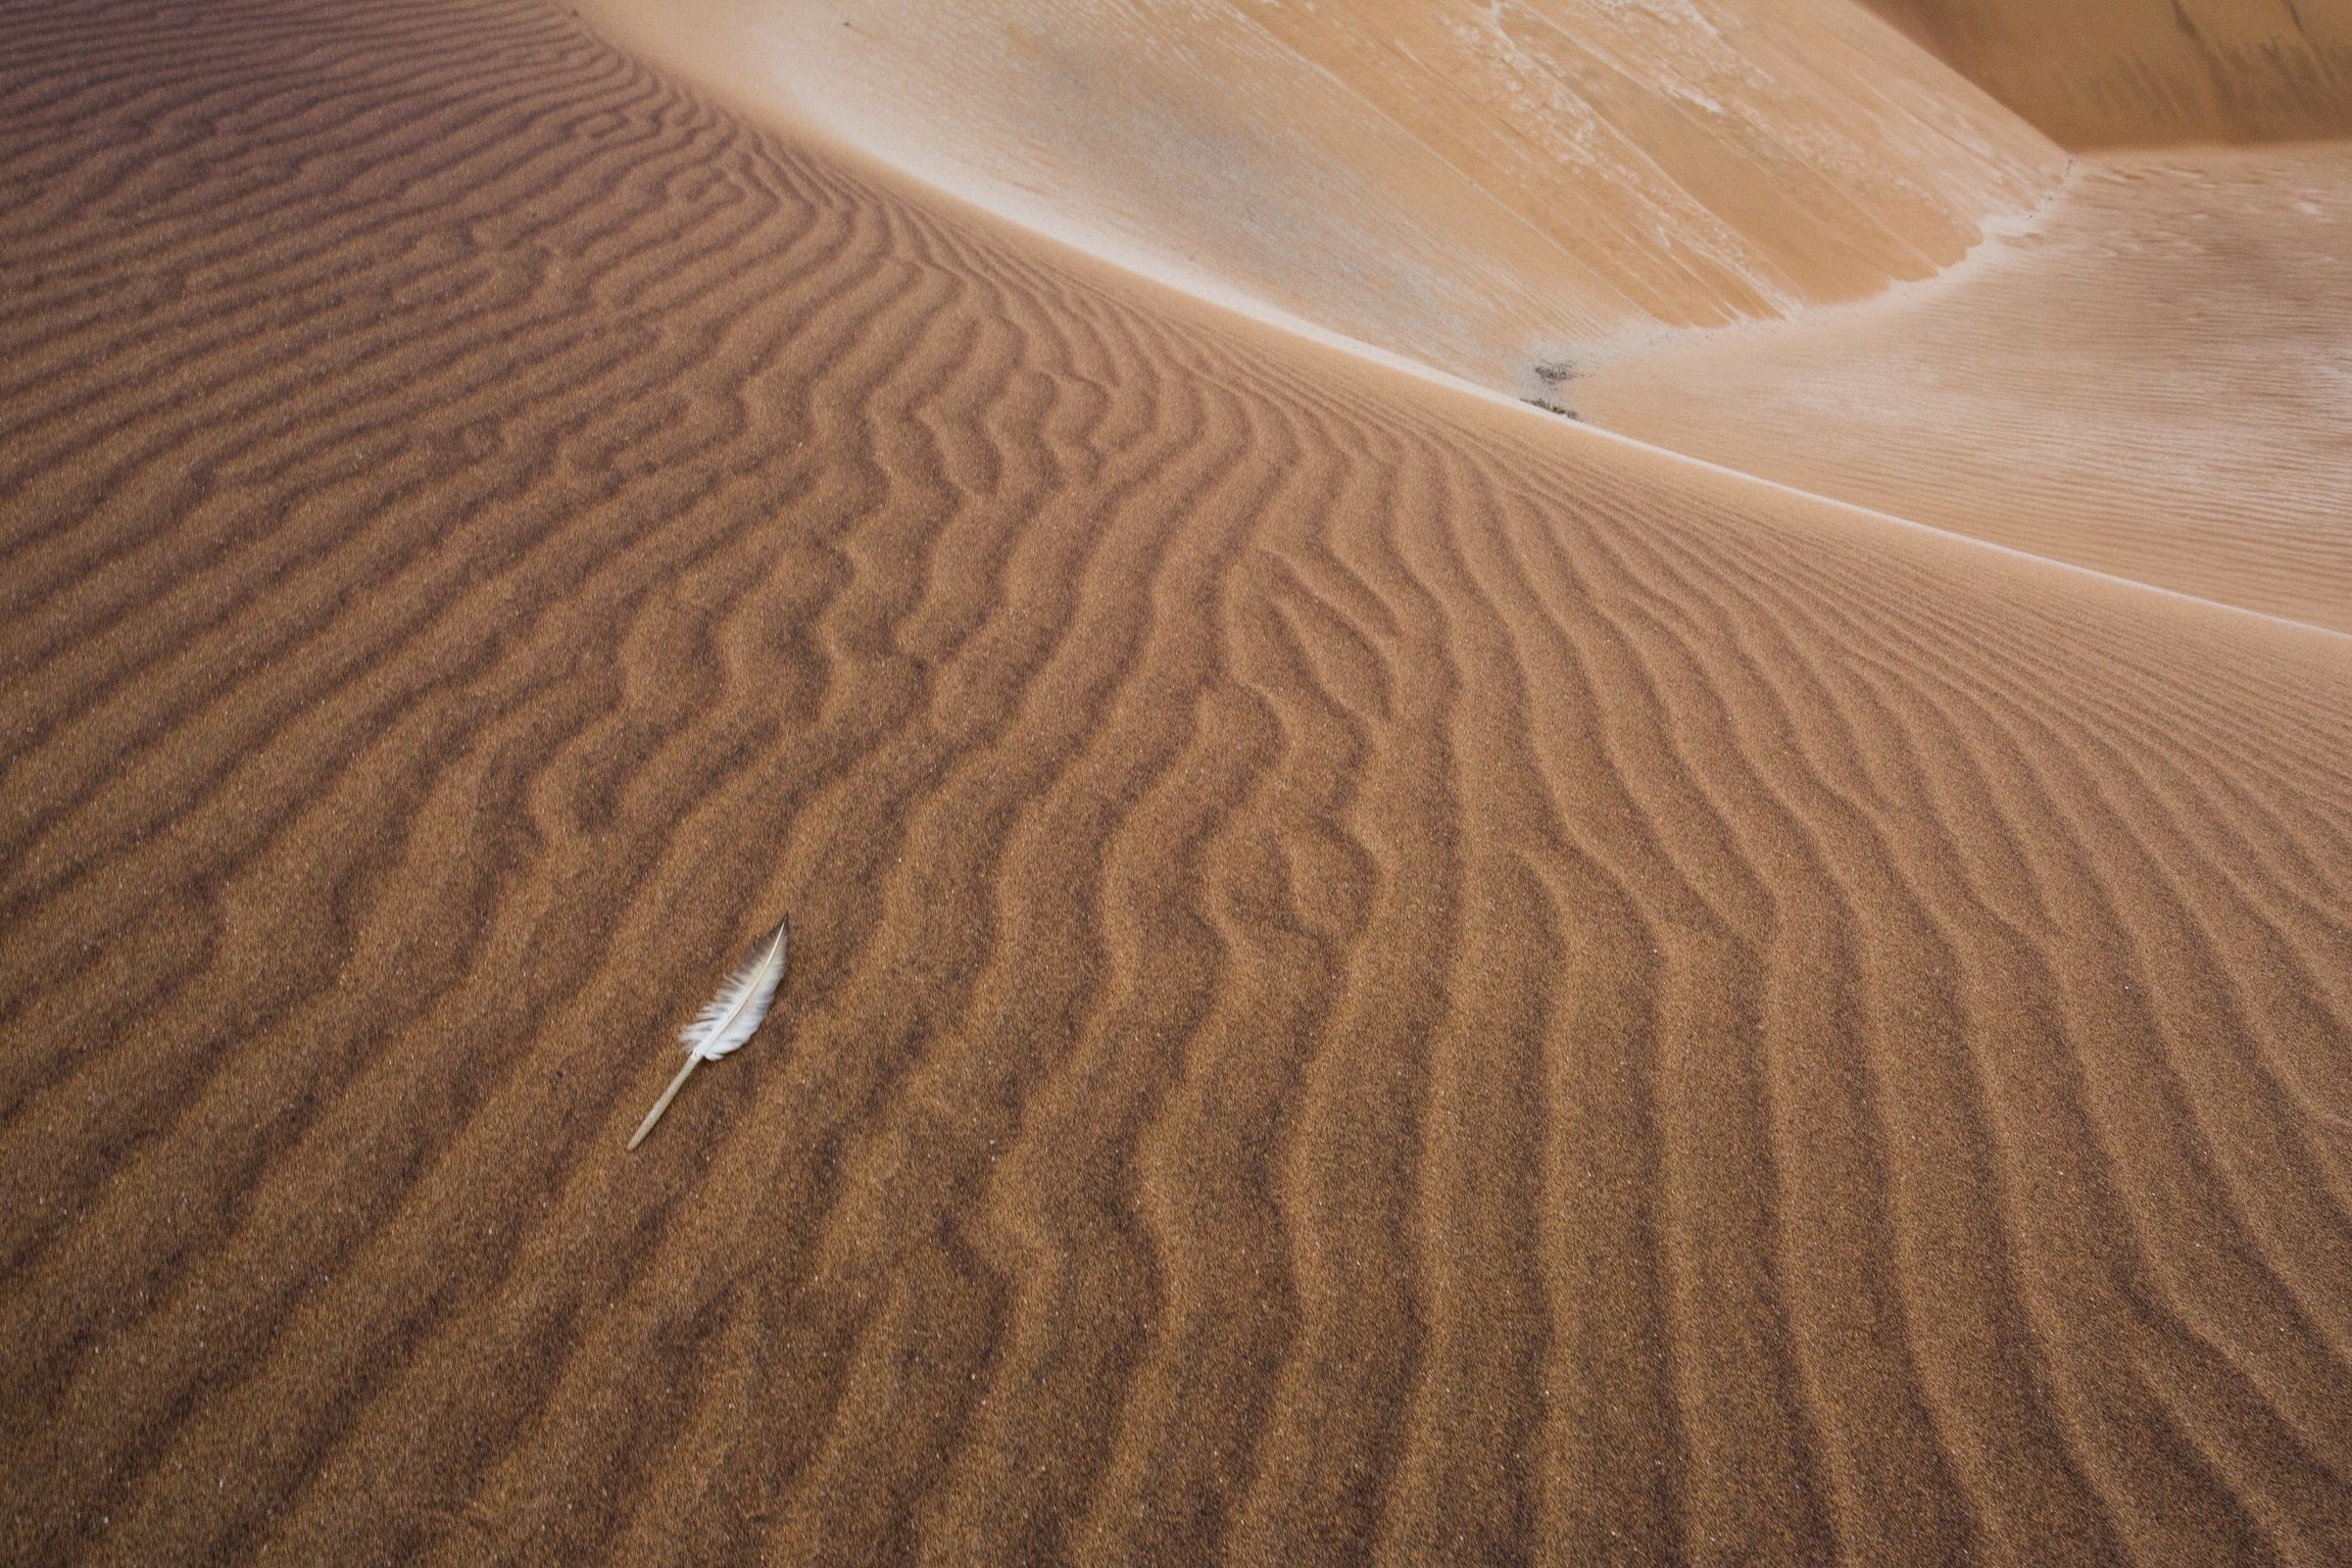 Landscapes are incredible in our photography tour of Namibia